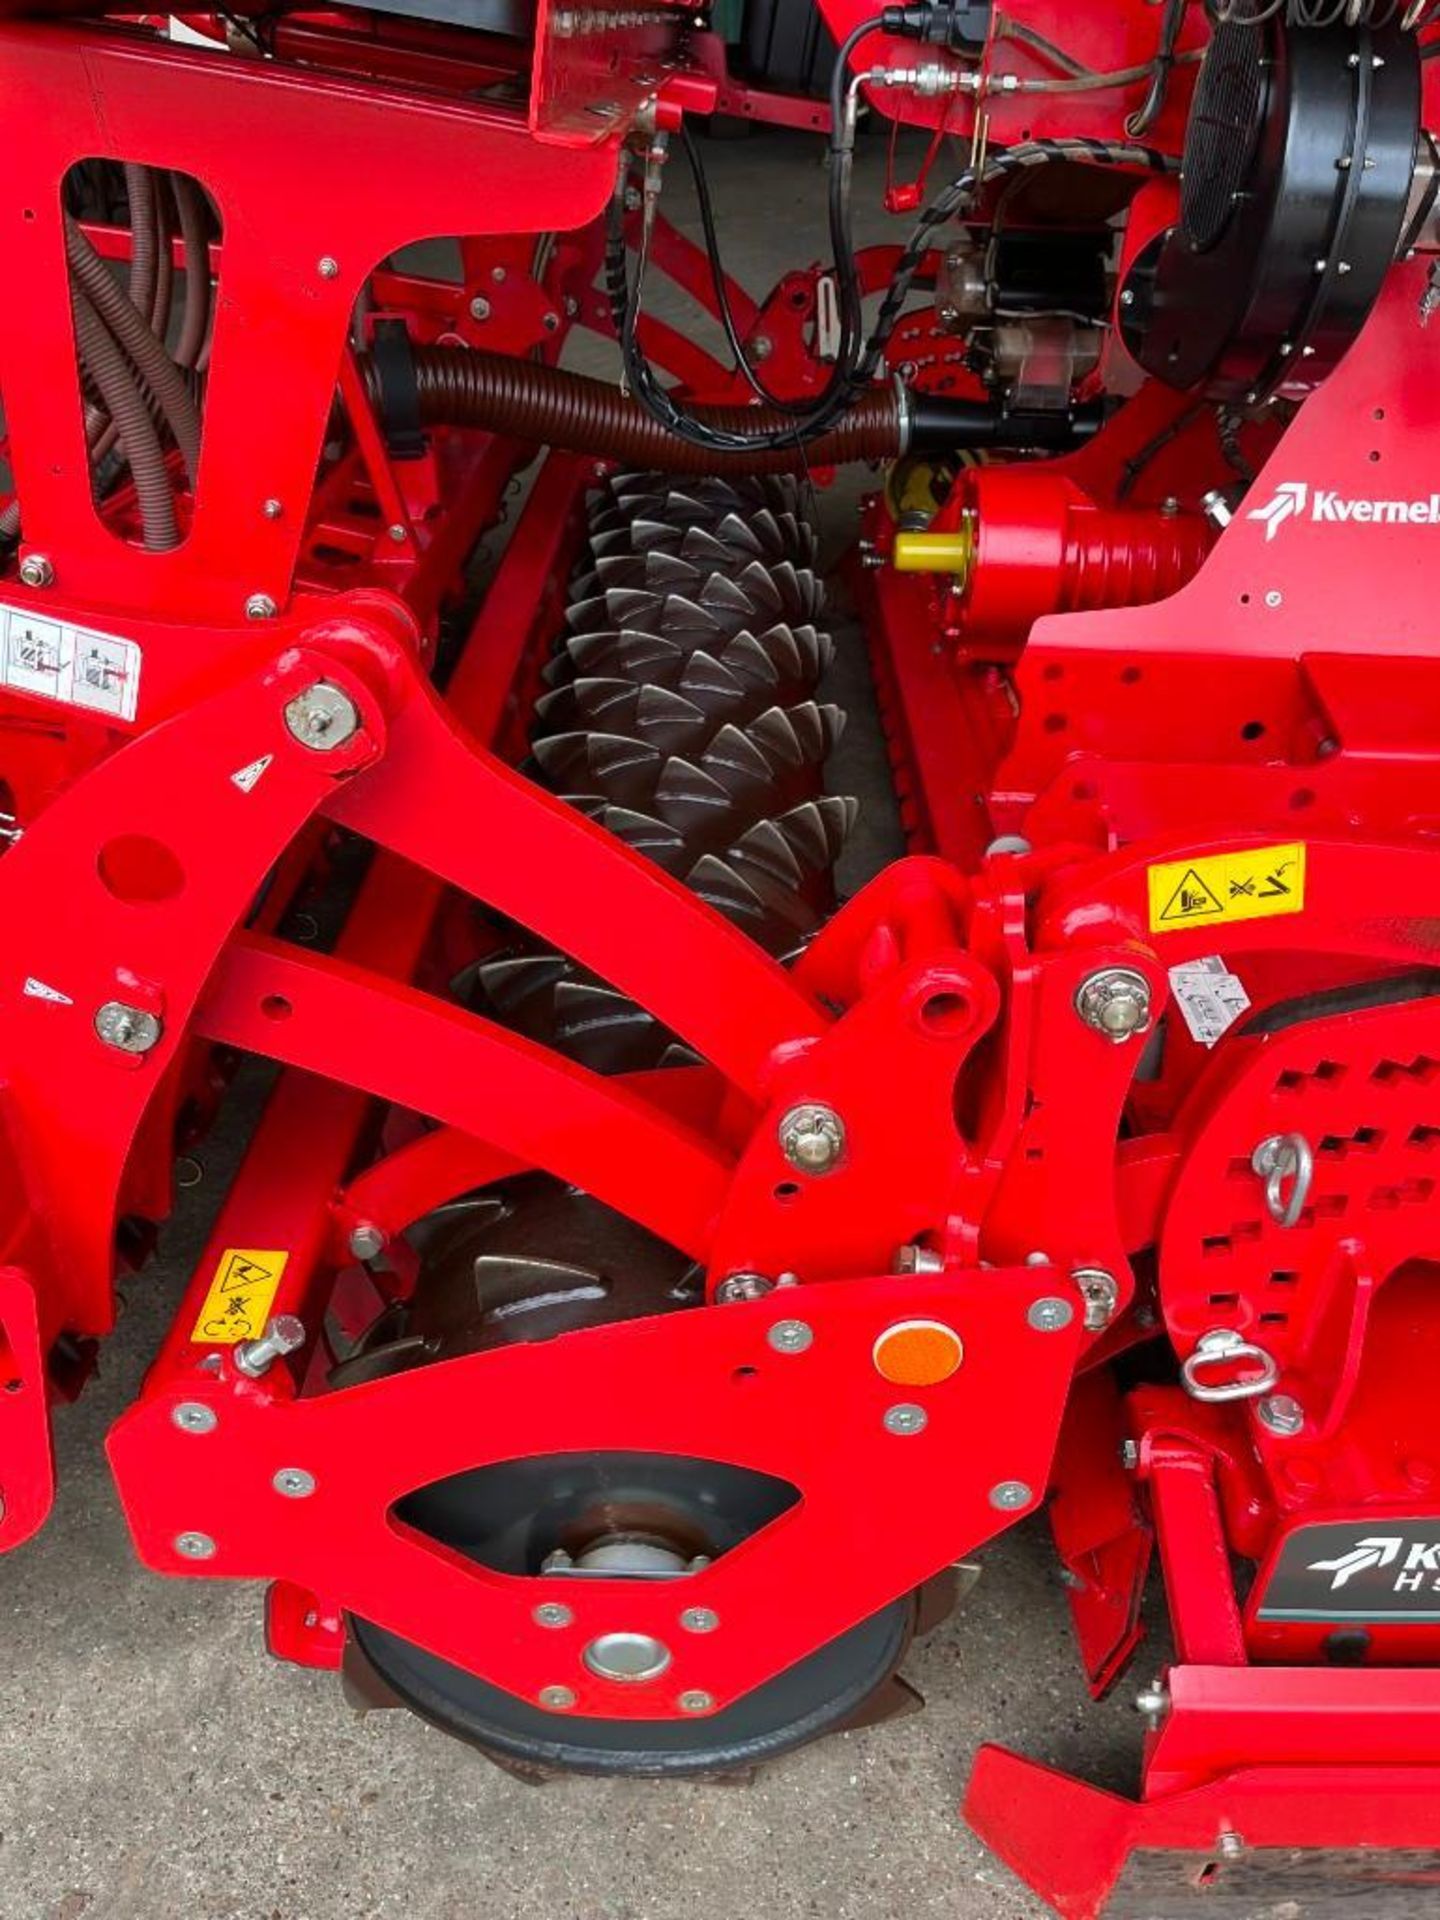 2019 Kverneland H Series Power Harrow 3m with e-Drill Compact 3m Drill - Image 7 of 10